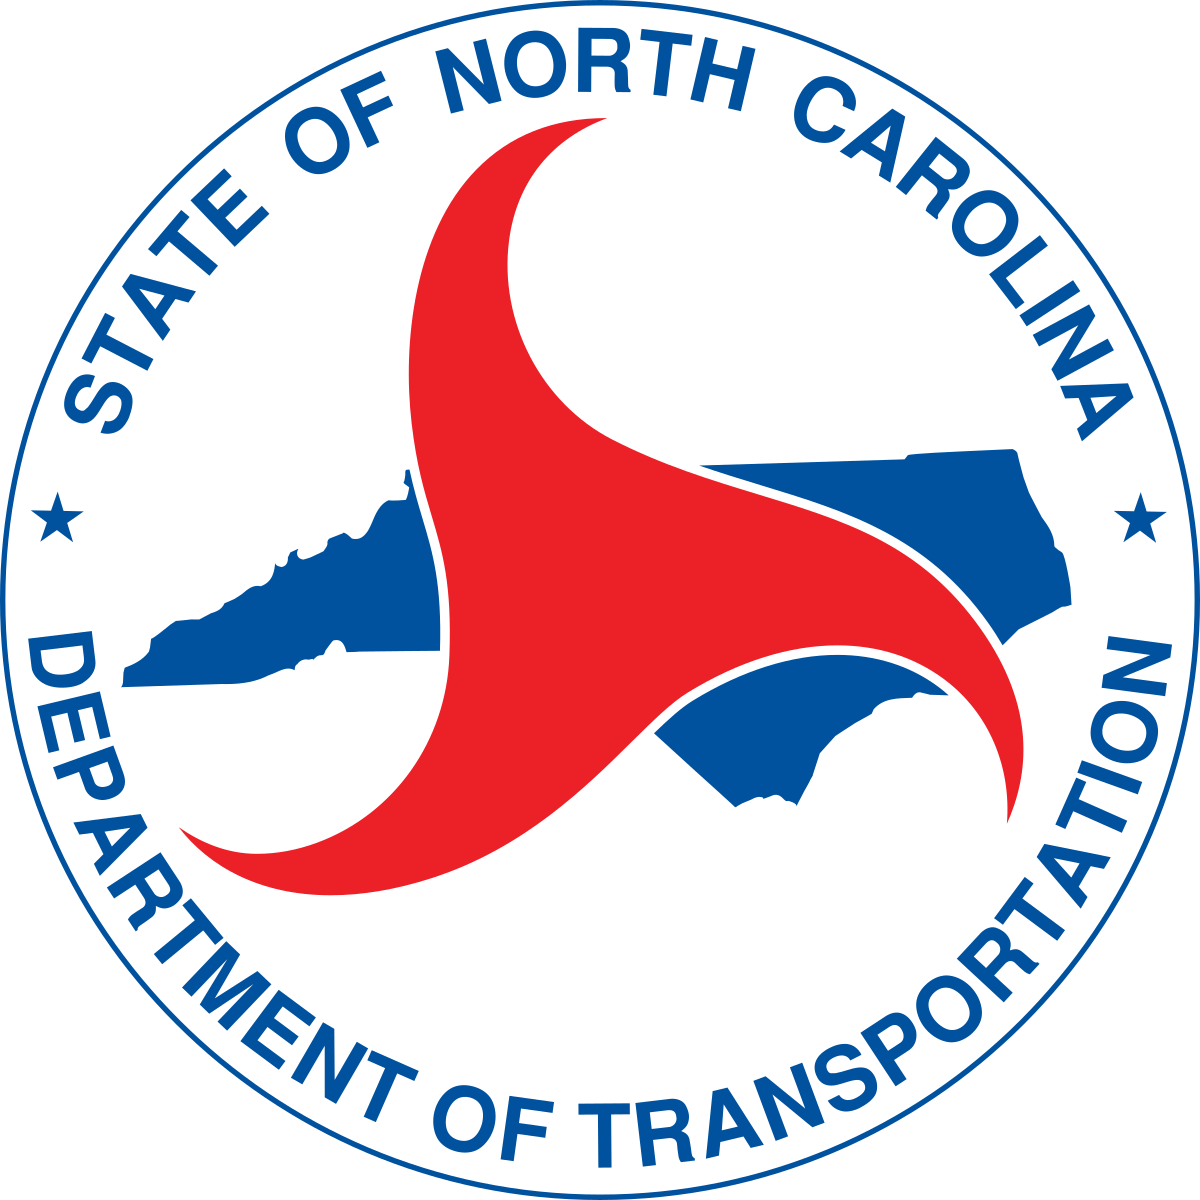 1200px-Seal_of_the_North_Carolina_Department_of_Transportation.svg.png